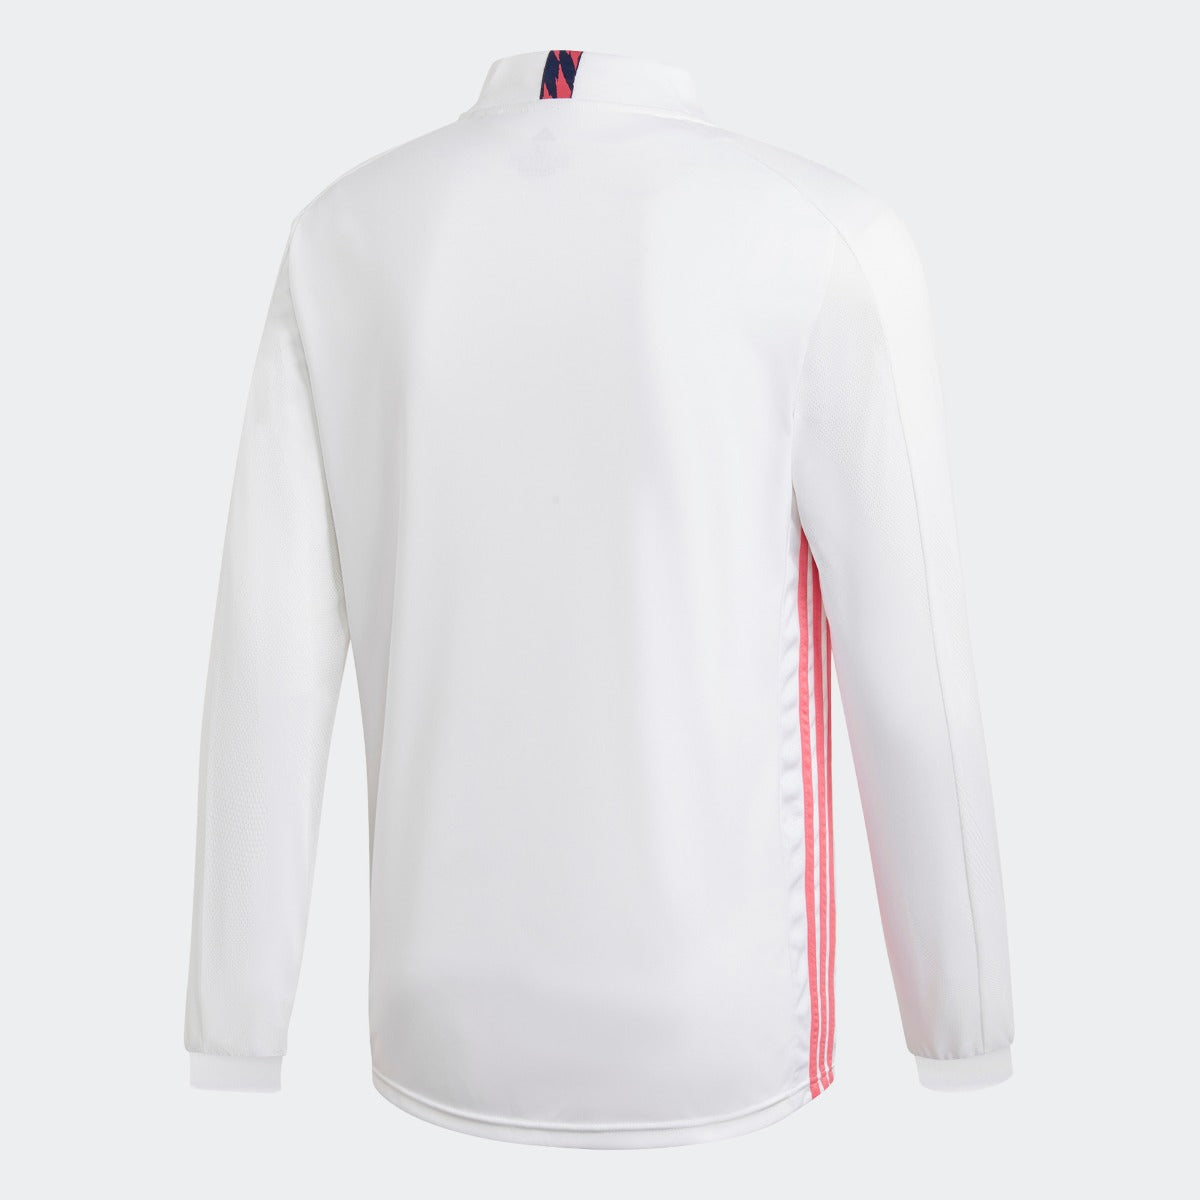 Adidas 2020-21 Real Madrid Home Long-Sleeve Jersey - White-Pink